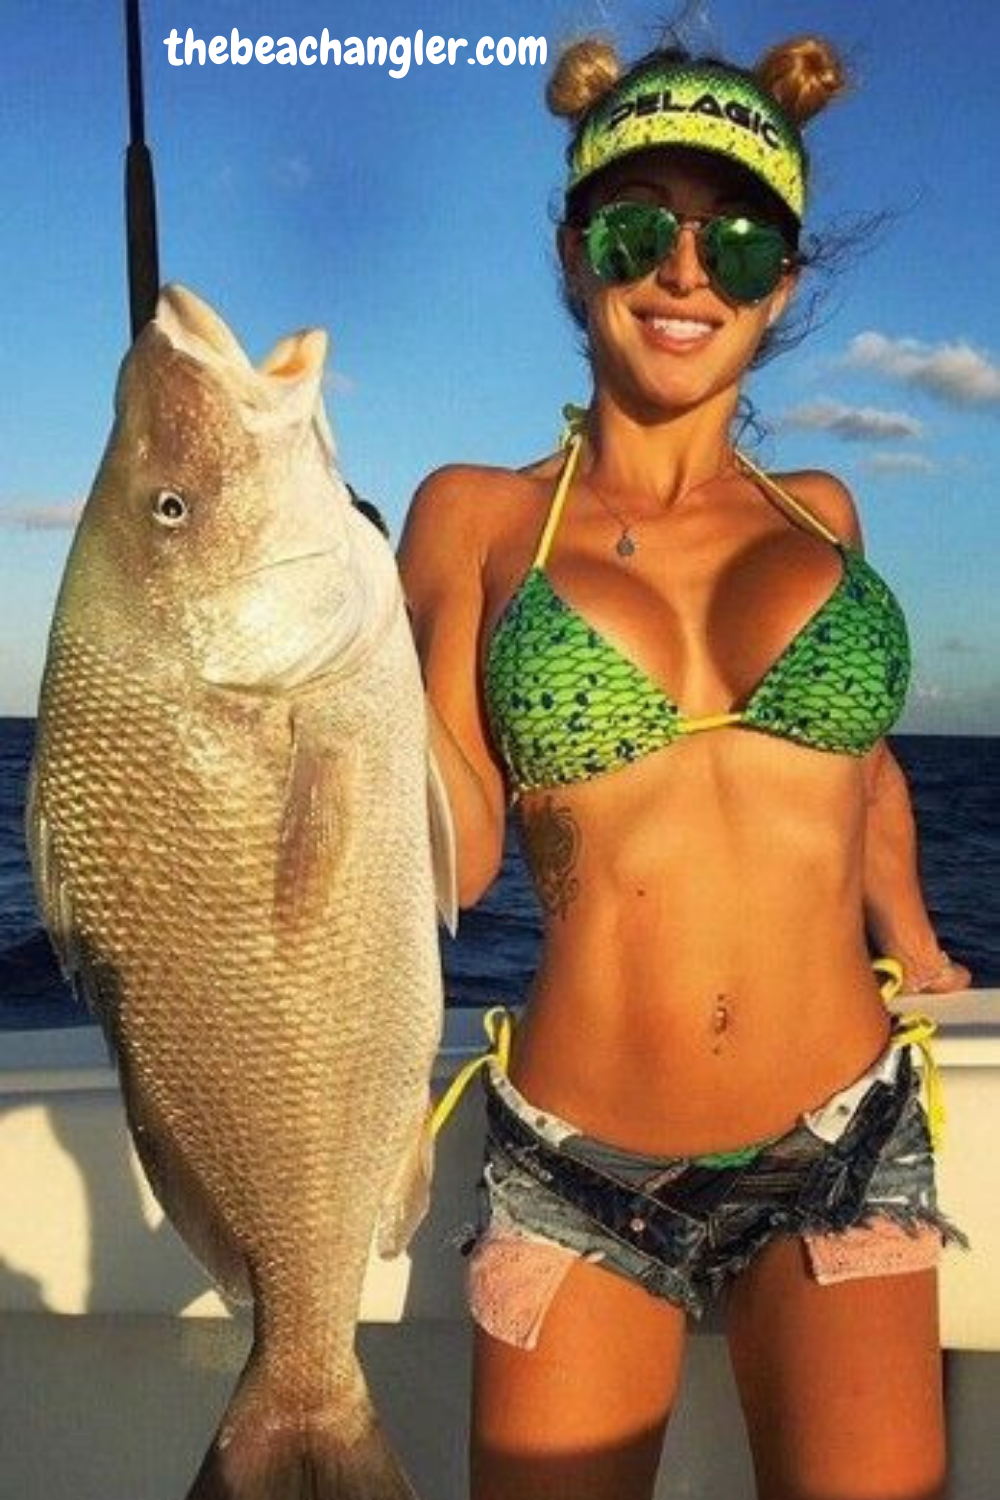 Young Lady with a nice catch offshore - TowBoatUS Review